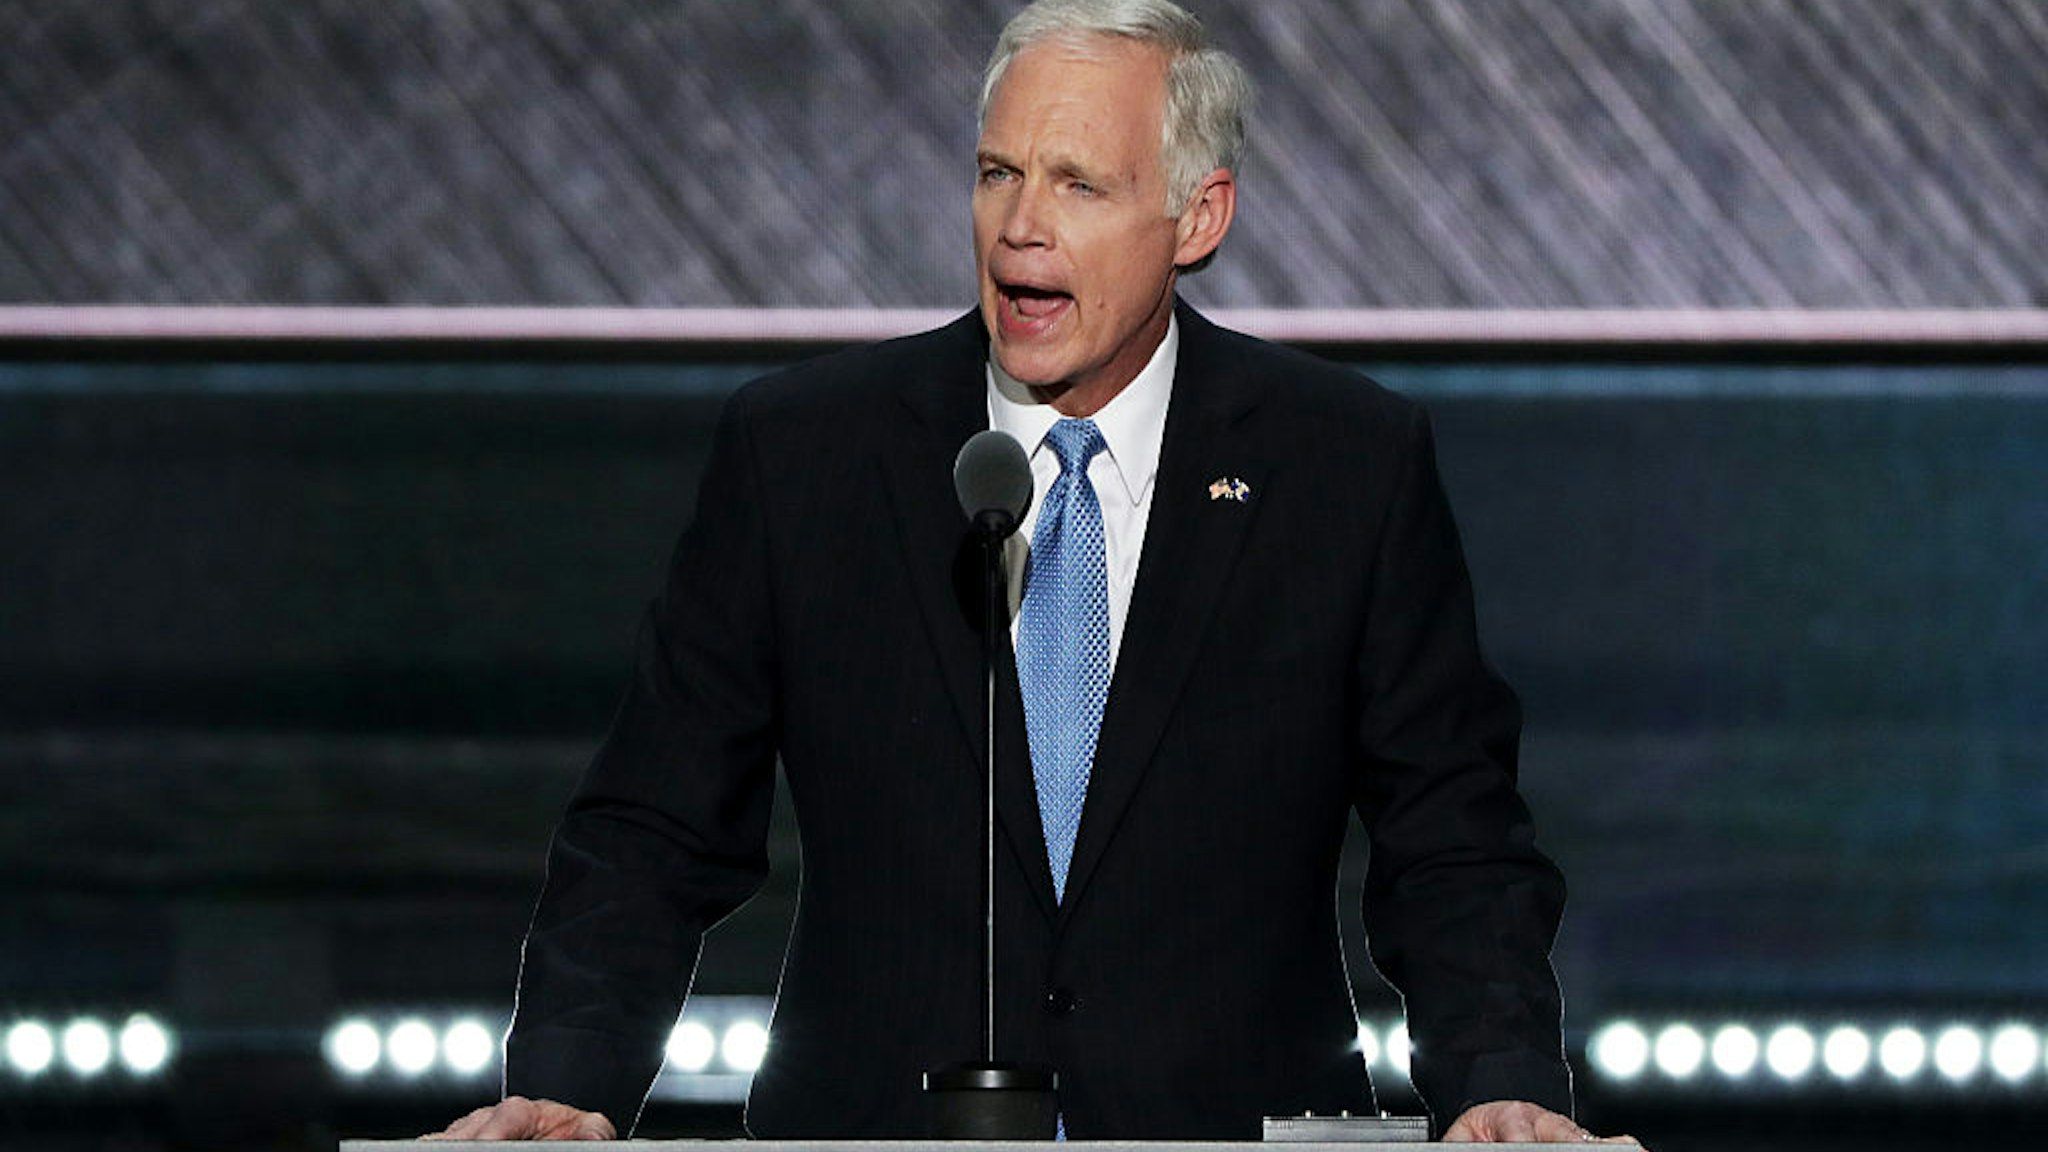 CLEVELAND, OH - JULY 19: Sen. Ron Johnson (R-WI) delivers a speech on the second day of the Republican National Convention on July 19, 2016 at the Quicken Loans Arena in Cleveland, Ohio. Republican presidential candidate Donald Trump received the number of votes needed to secure the party's nomination. An estimated 50,000 people are expected in Cleveland, including hundreds of protesters and members of the media. The four-day Republican National Convention kicked off on July 18.